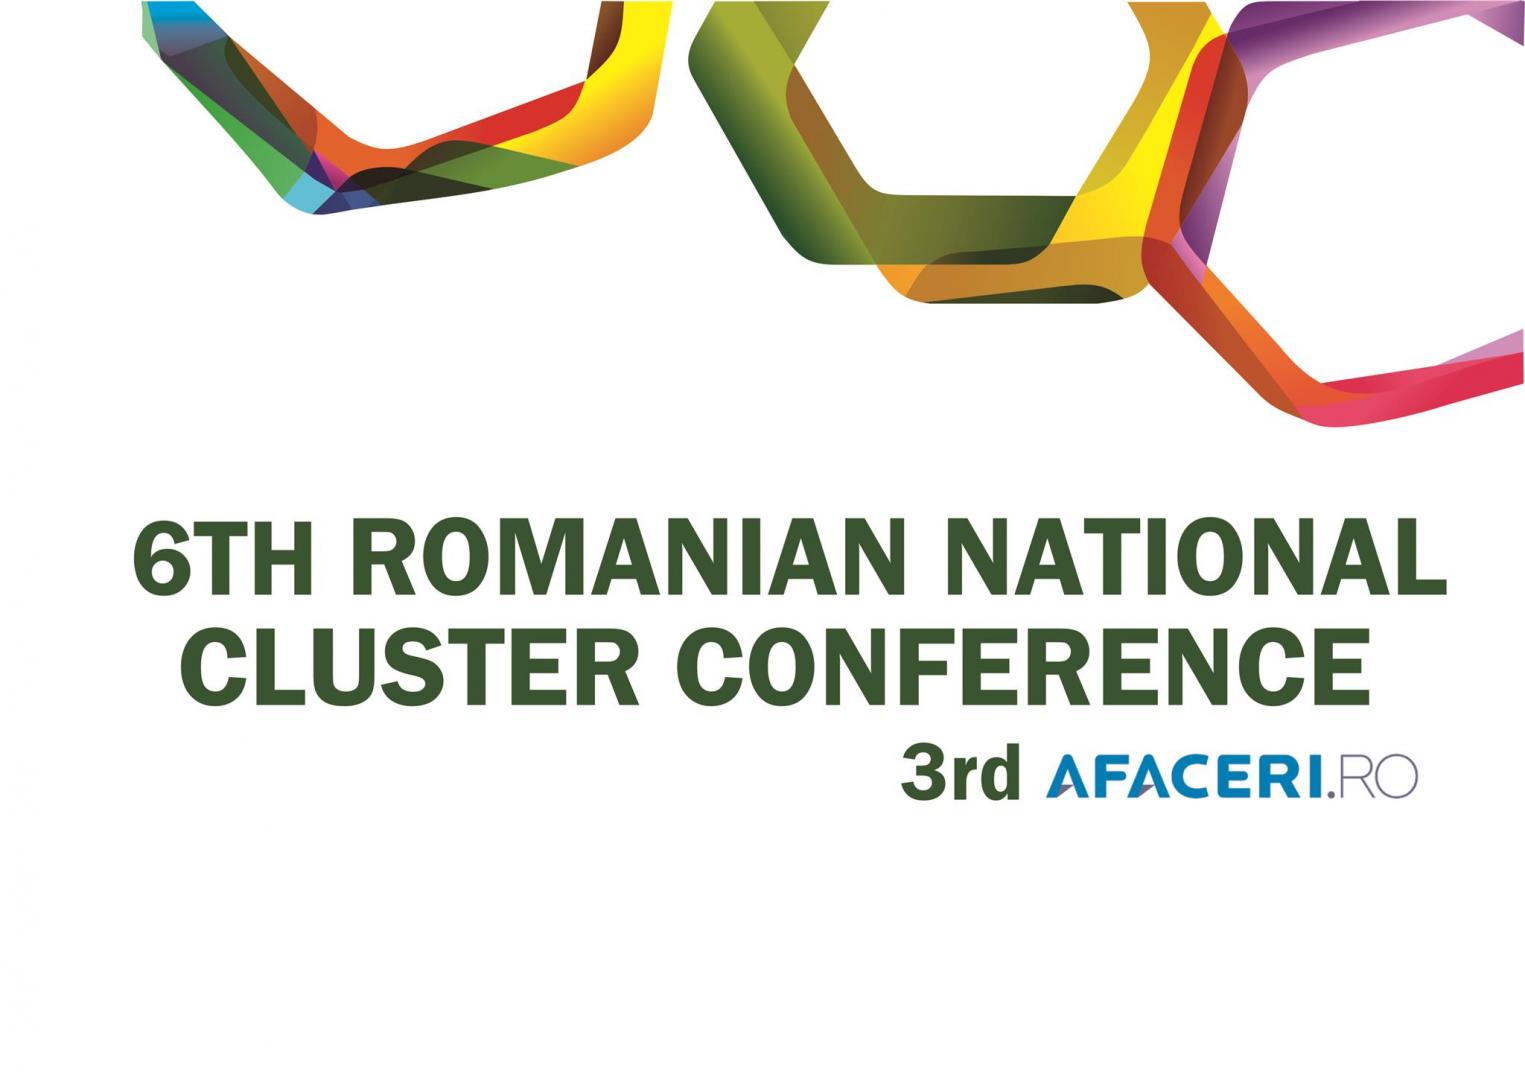 The 6th Romanian National Cluster Conference